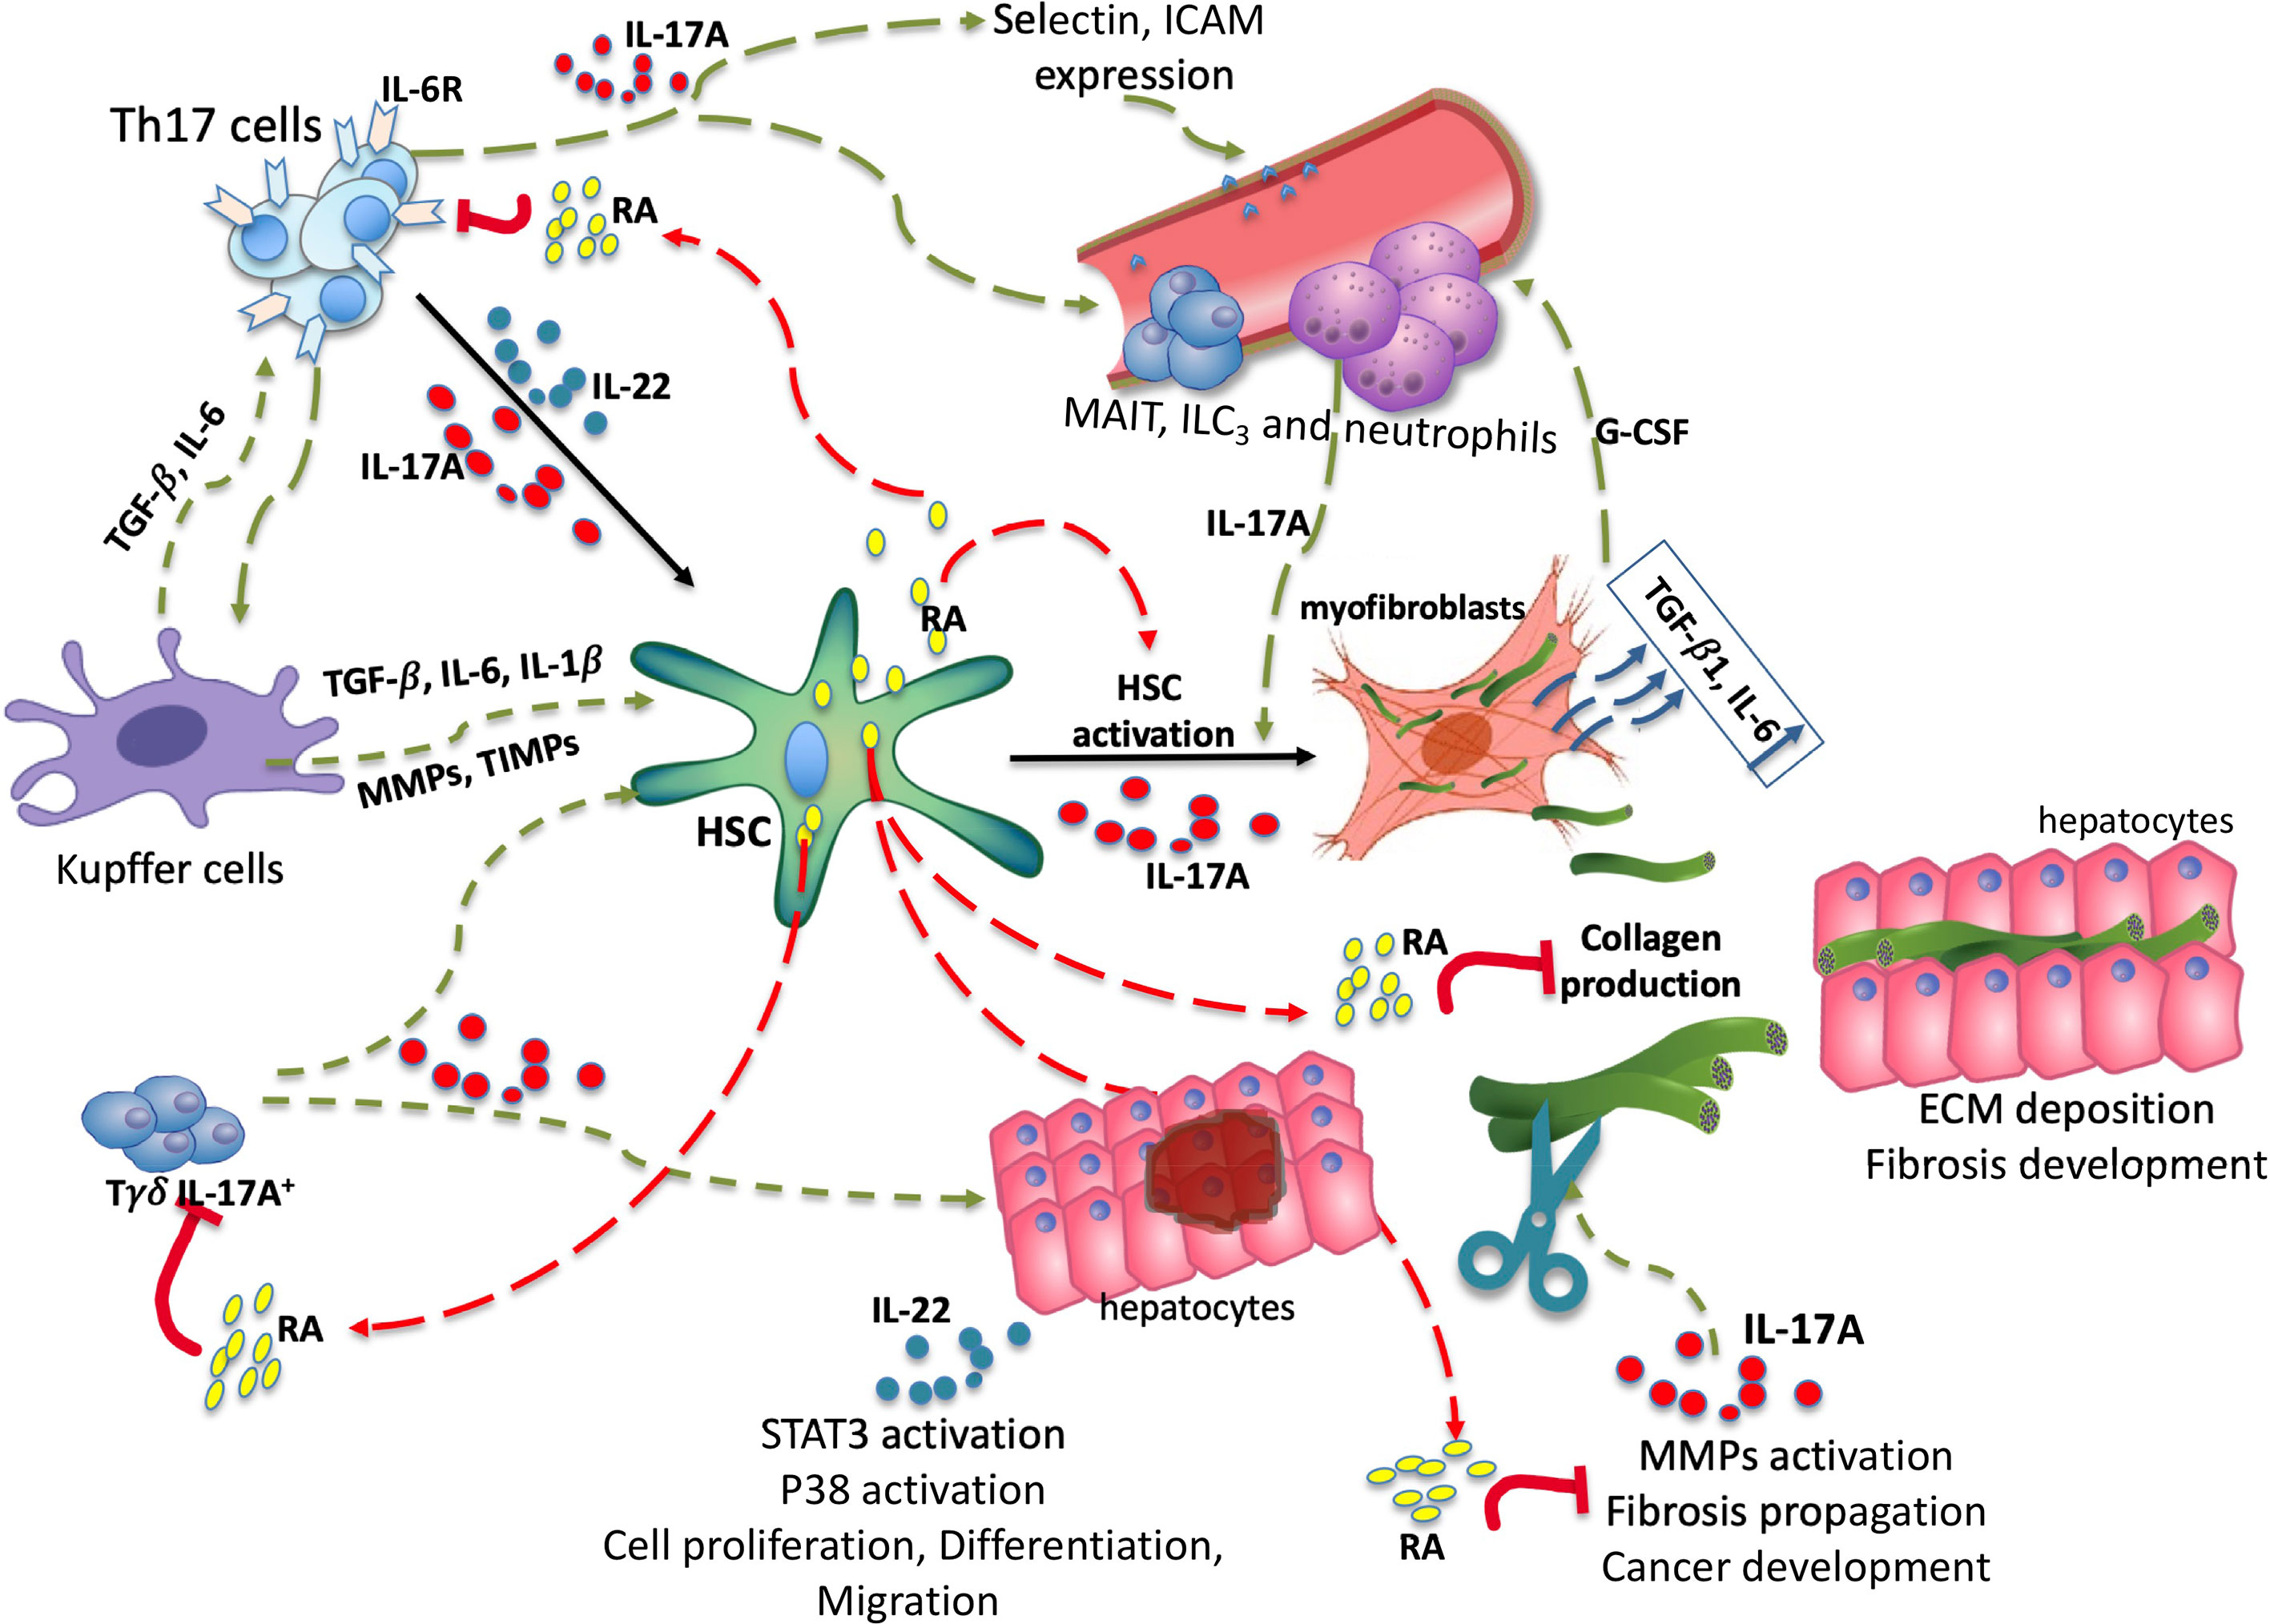 Frontiers | Retinoic Acid: A New Old Friend of IL-17A in the 